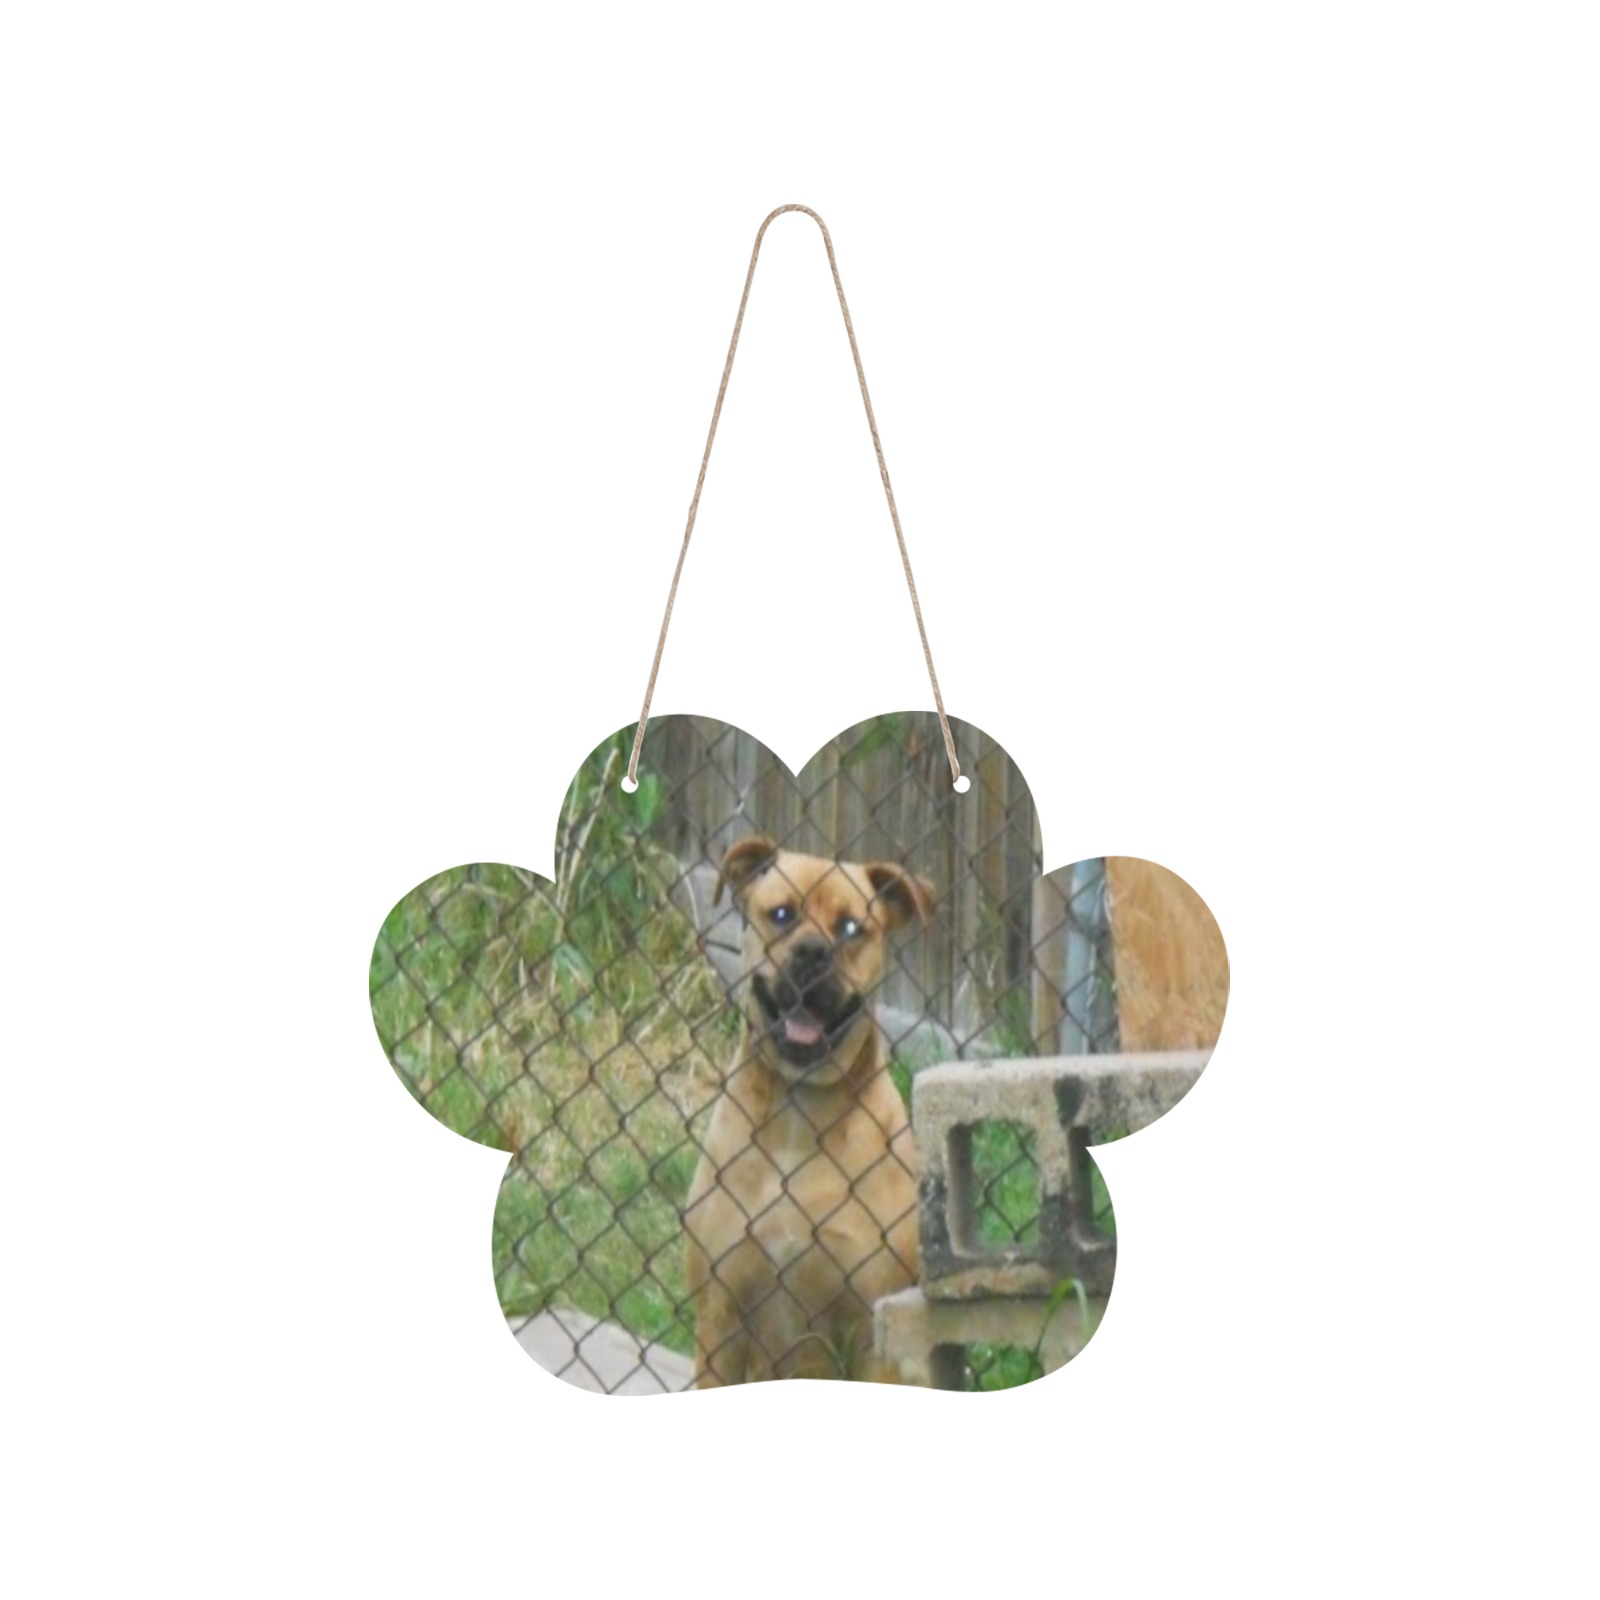 A Smiling Dog Cat Paw Wood Door Hanging Sign